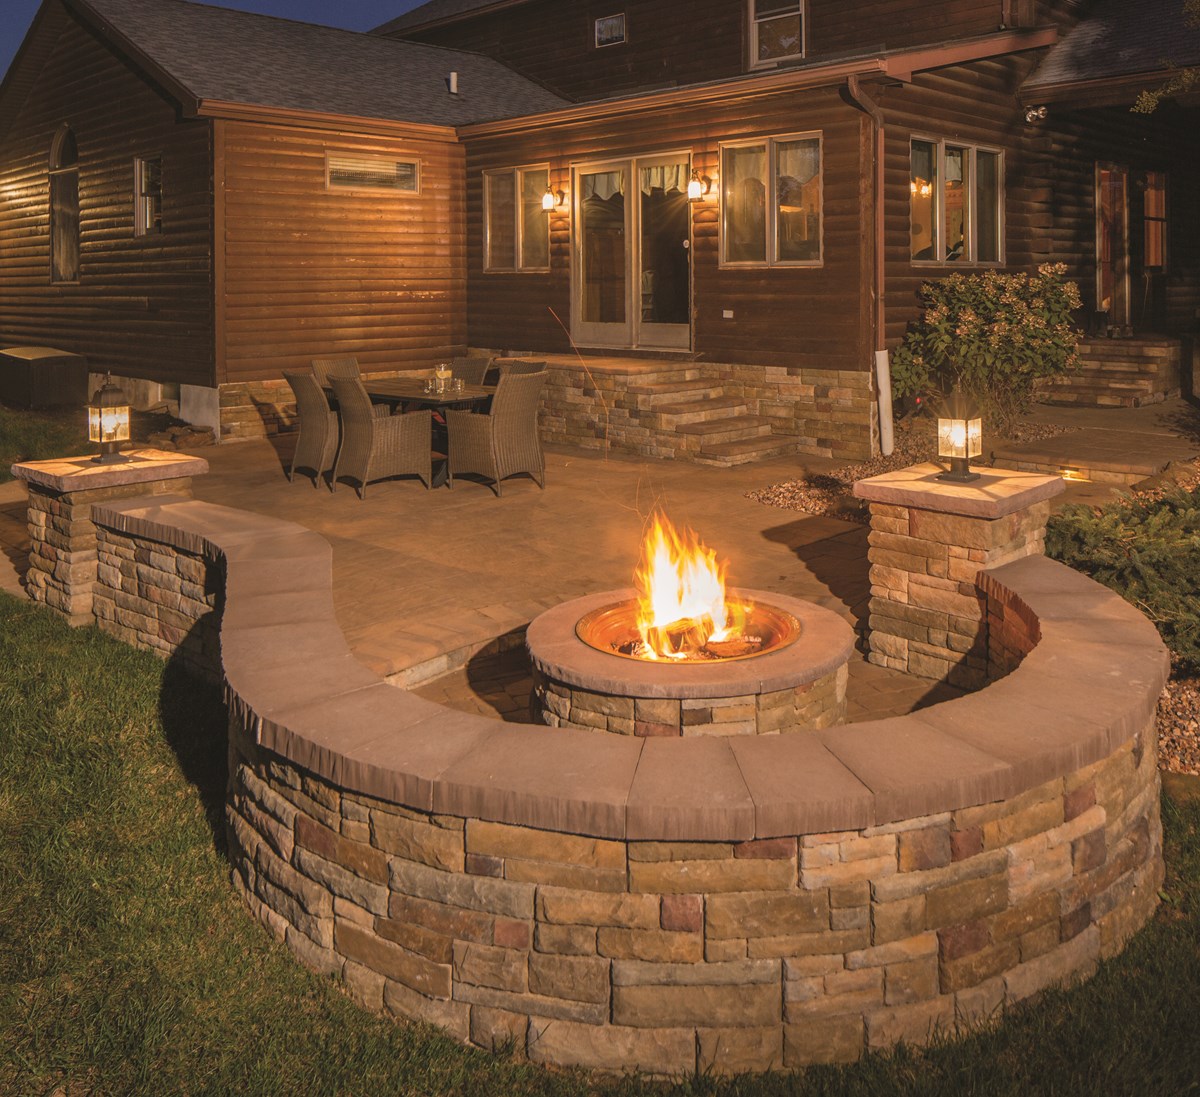 47_Rustic, outdoor evening scene with lit fire pit. Small ...